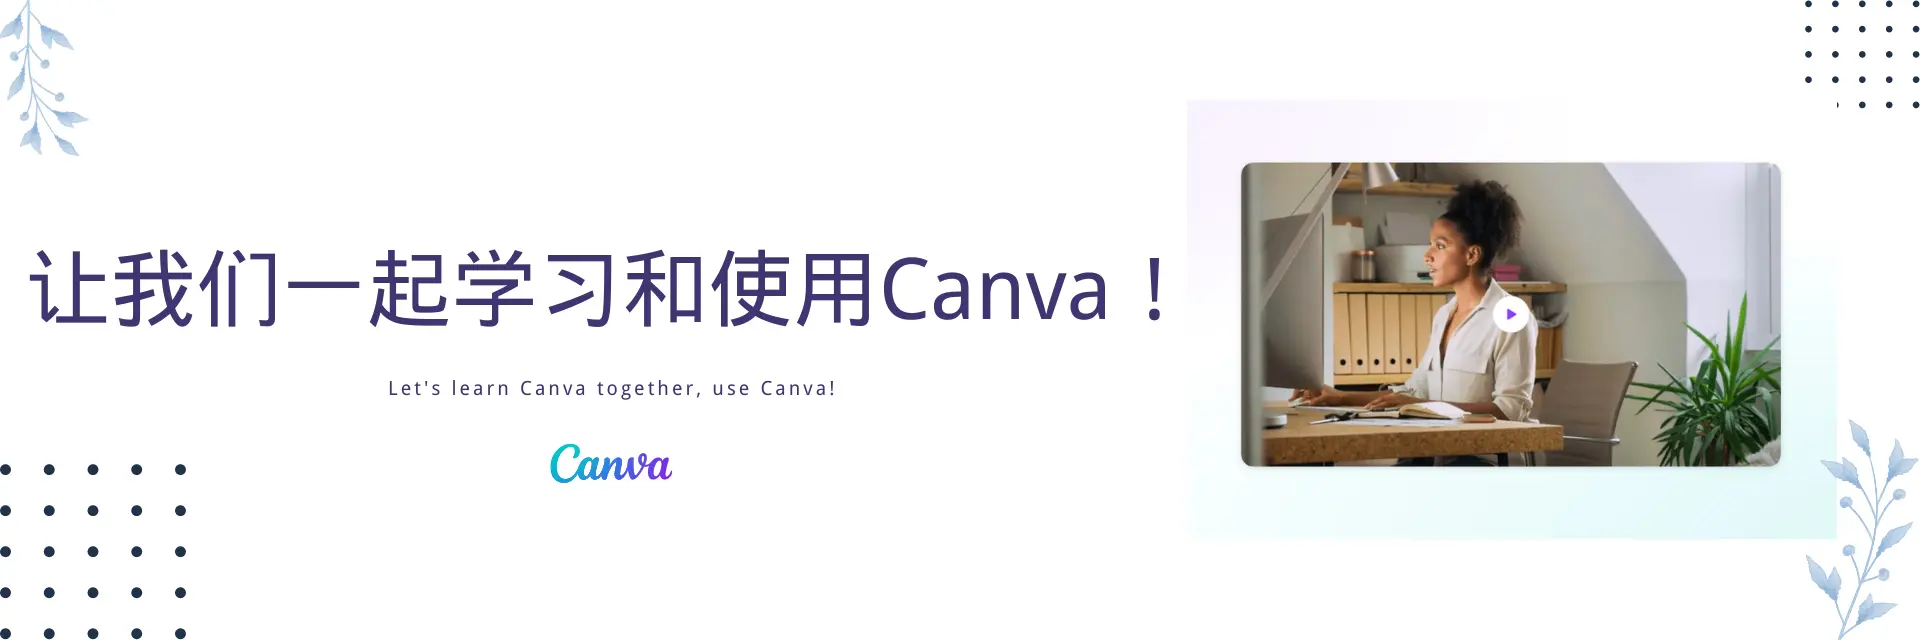 Canva page cover image (4)